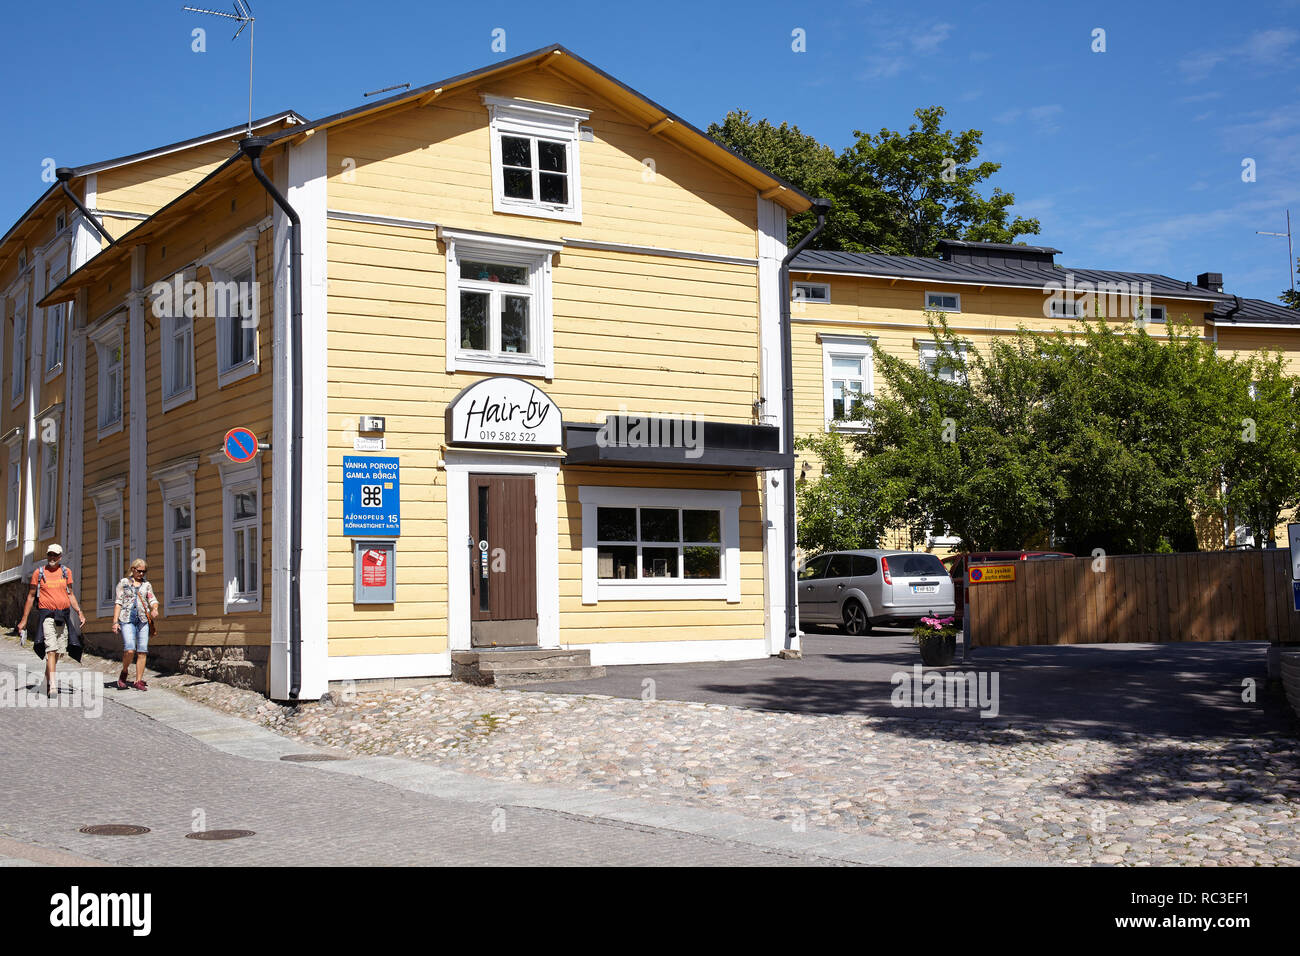 Porvoo, Finland - July 16, 2017: People at street sign of old town of Porvoo. Porvoo, Borga in Swedish, is one of the six medieval towns in Finland. Stock Photo